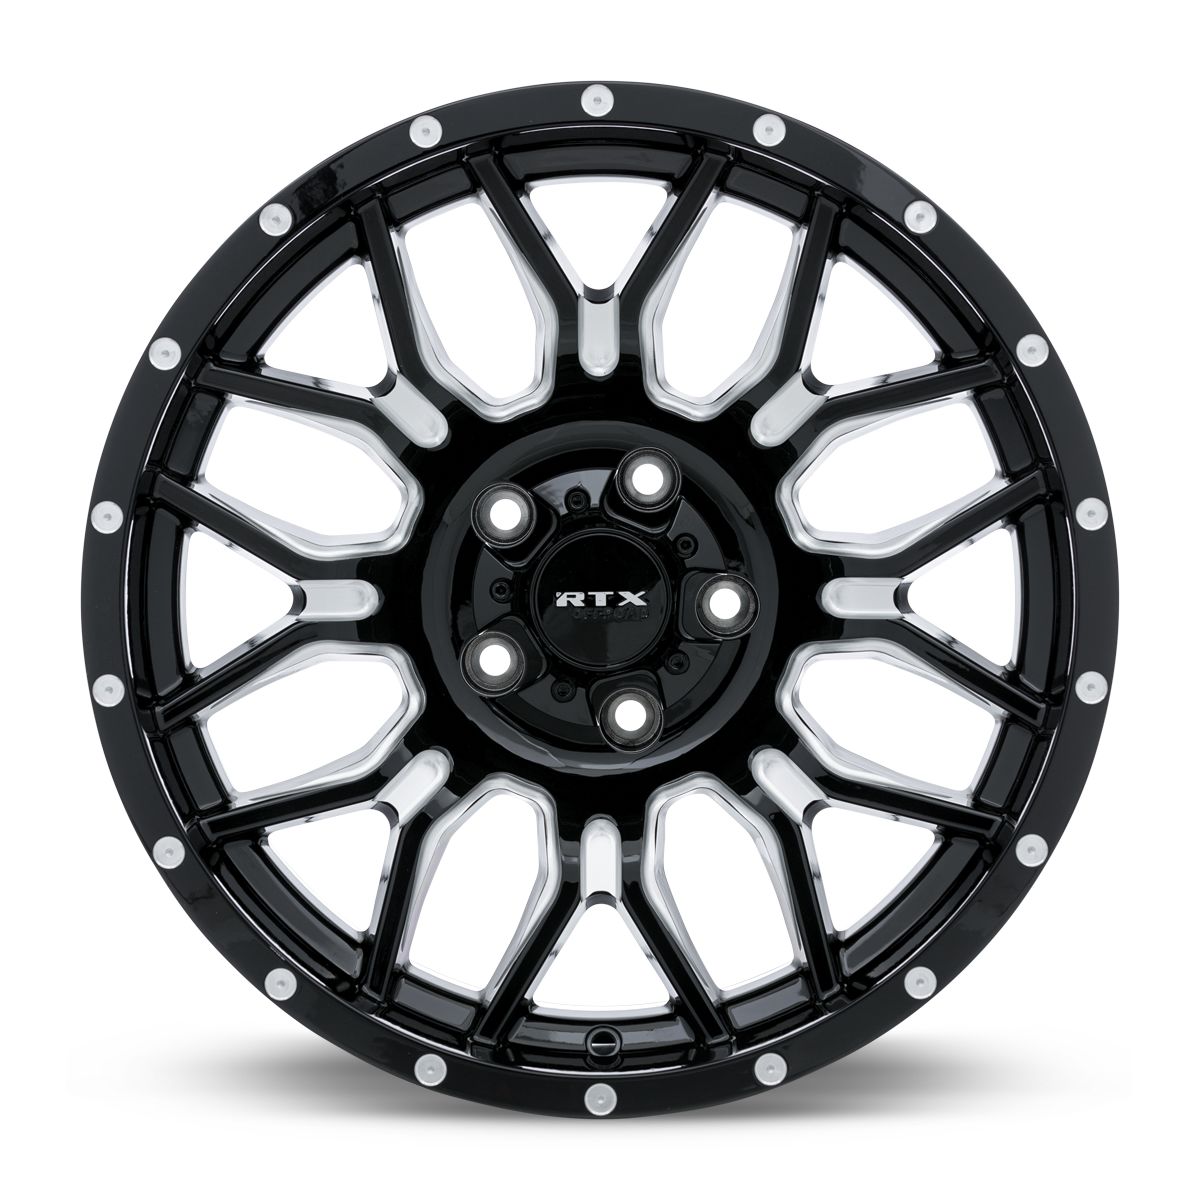 Claw • Gloss Black Milled with Rivets • 20x10 6x139.7 ET-18 CB106.1